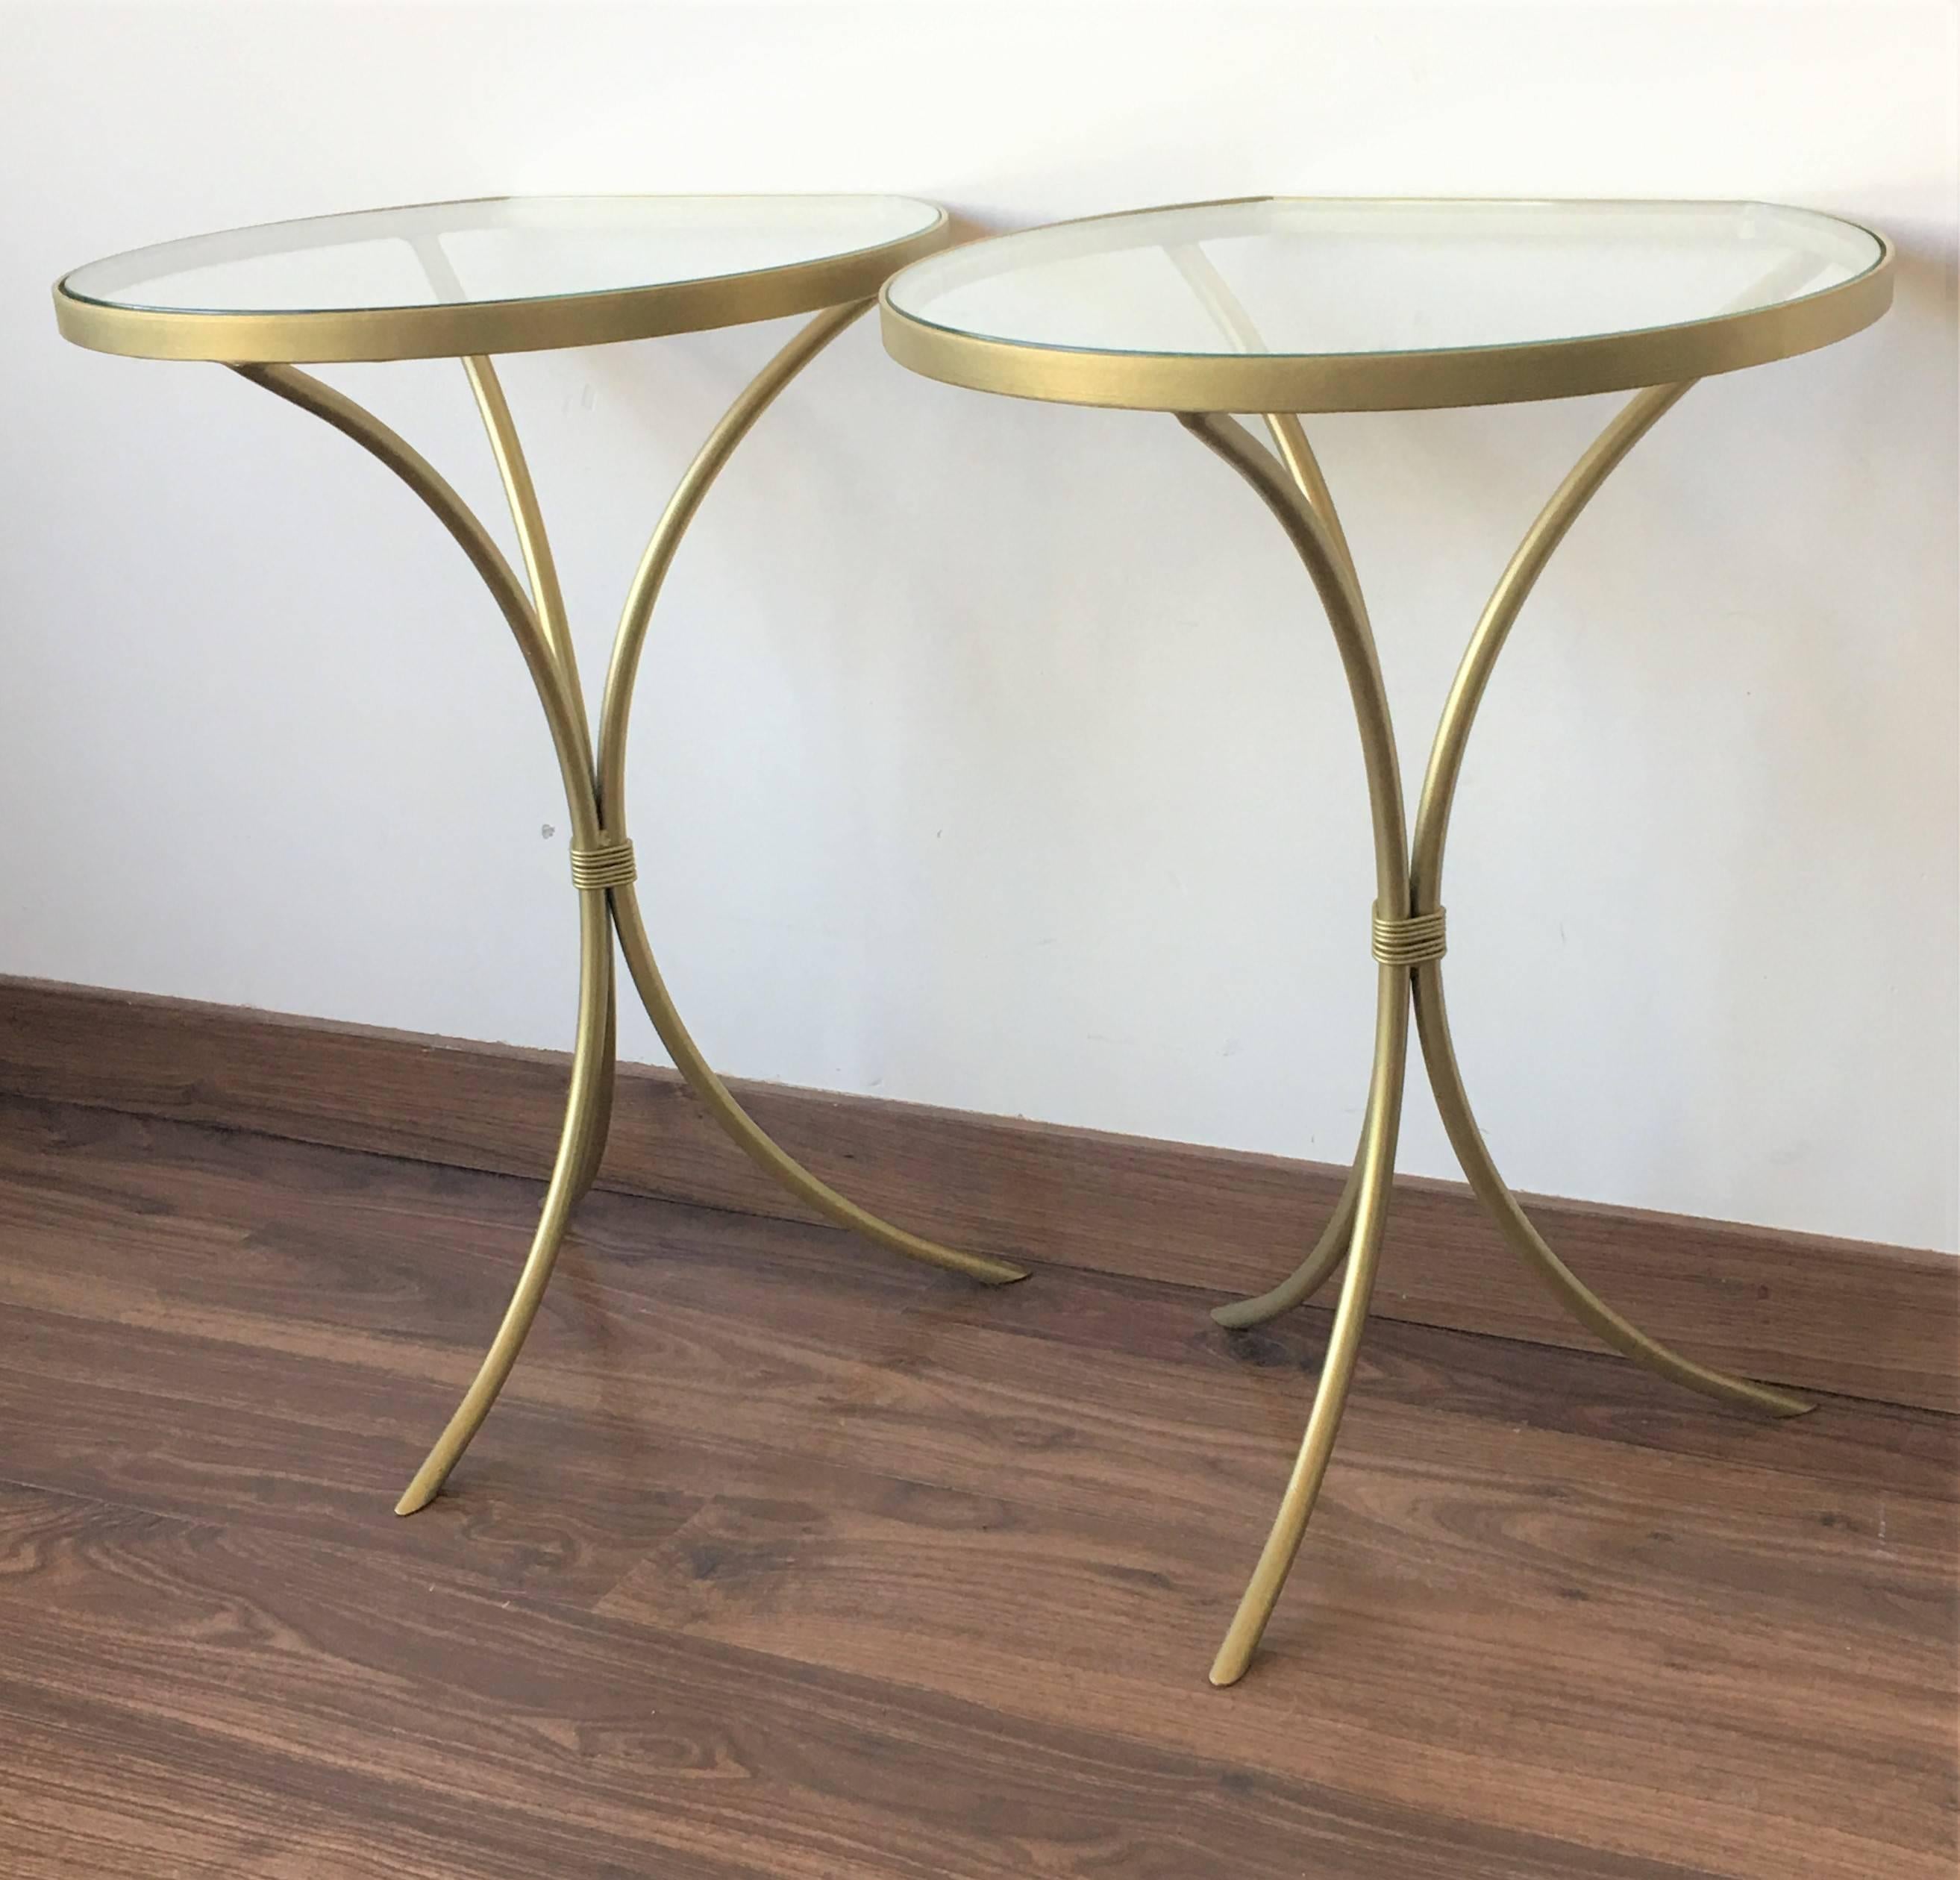 Pair of Italian Midcentury Glass and Brass Tripod Side, End or Nightstands 1